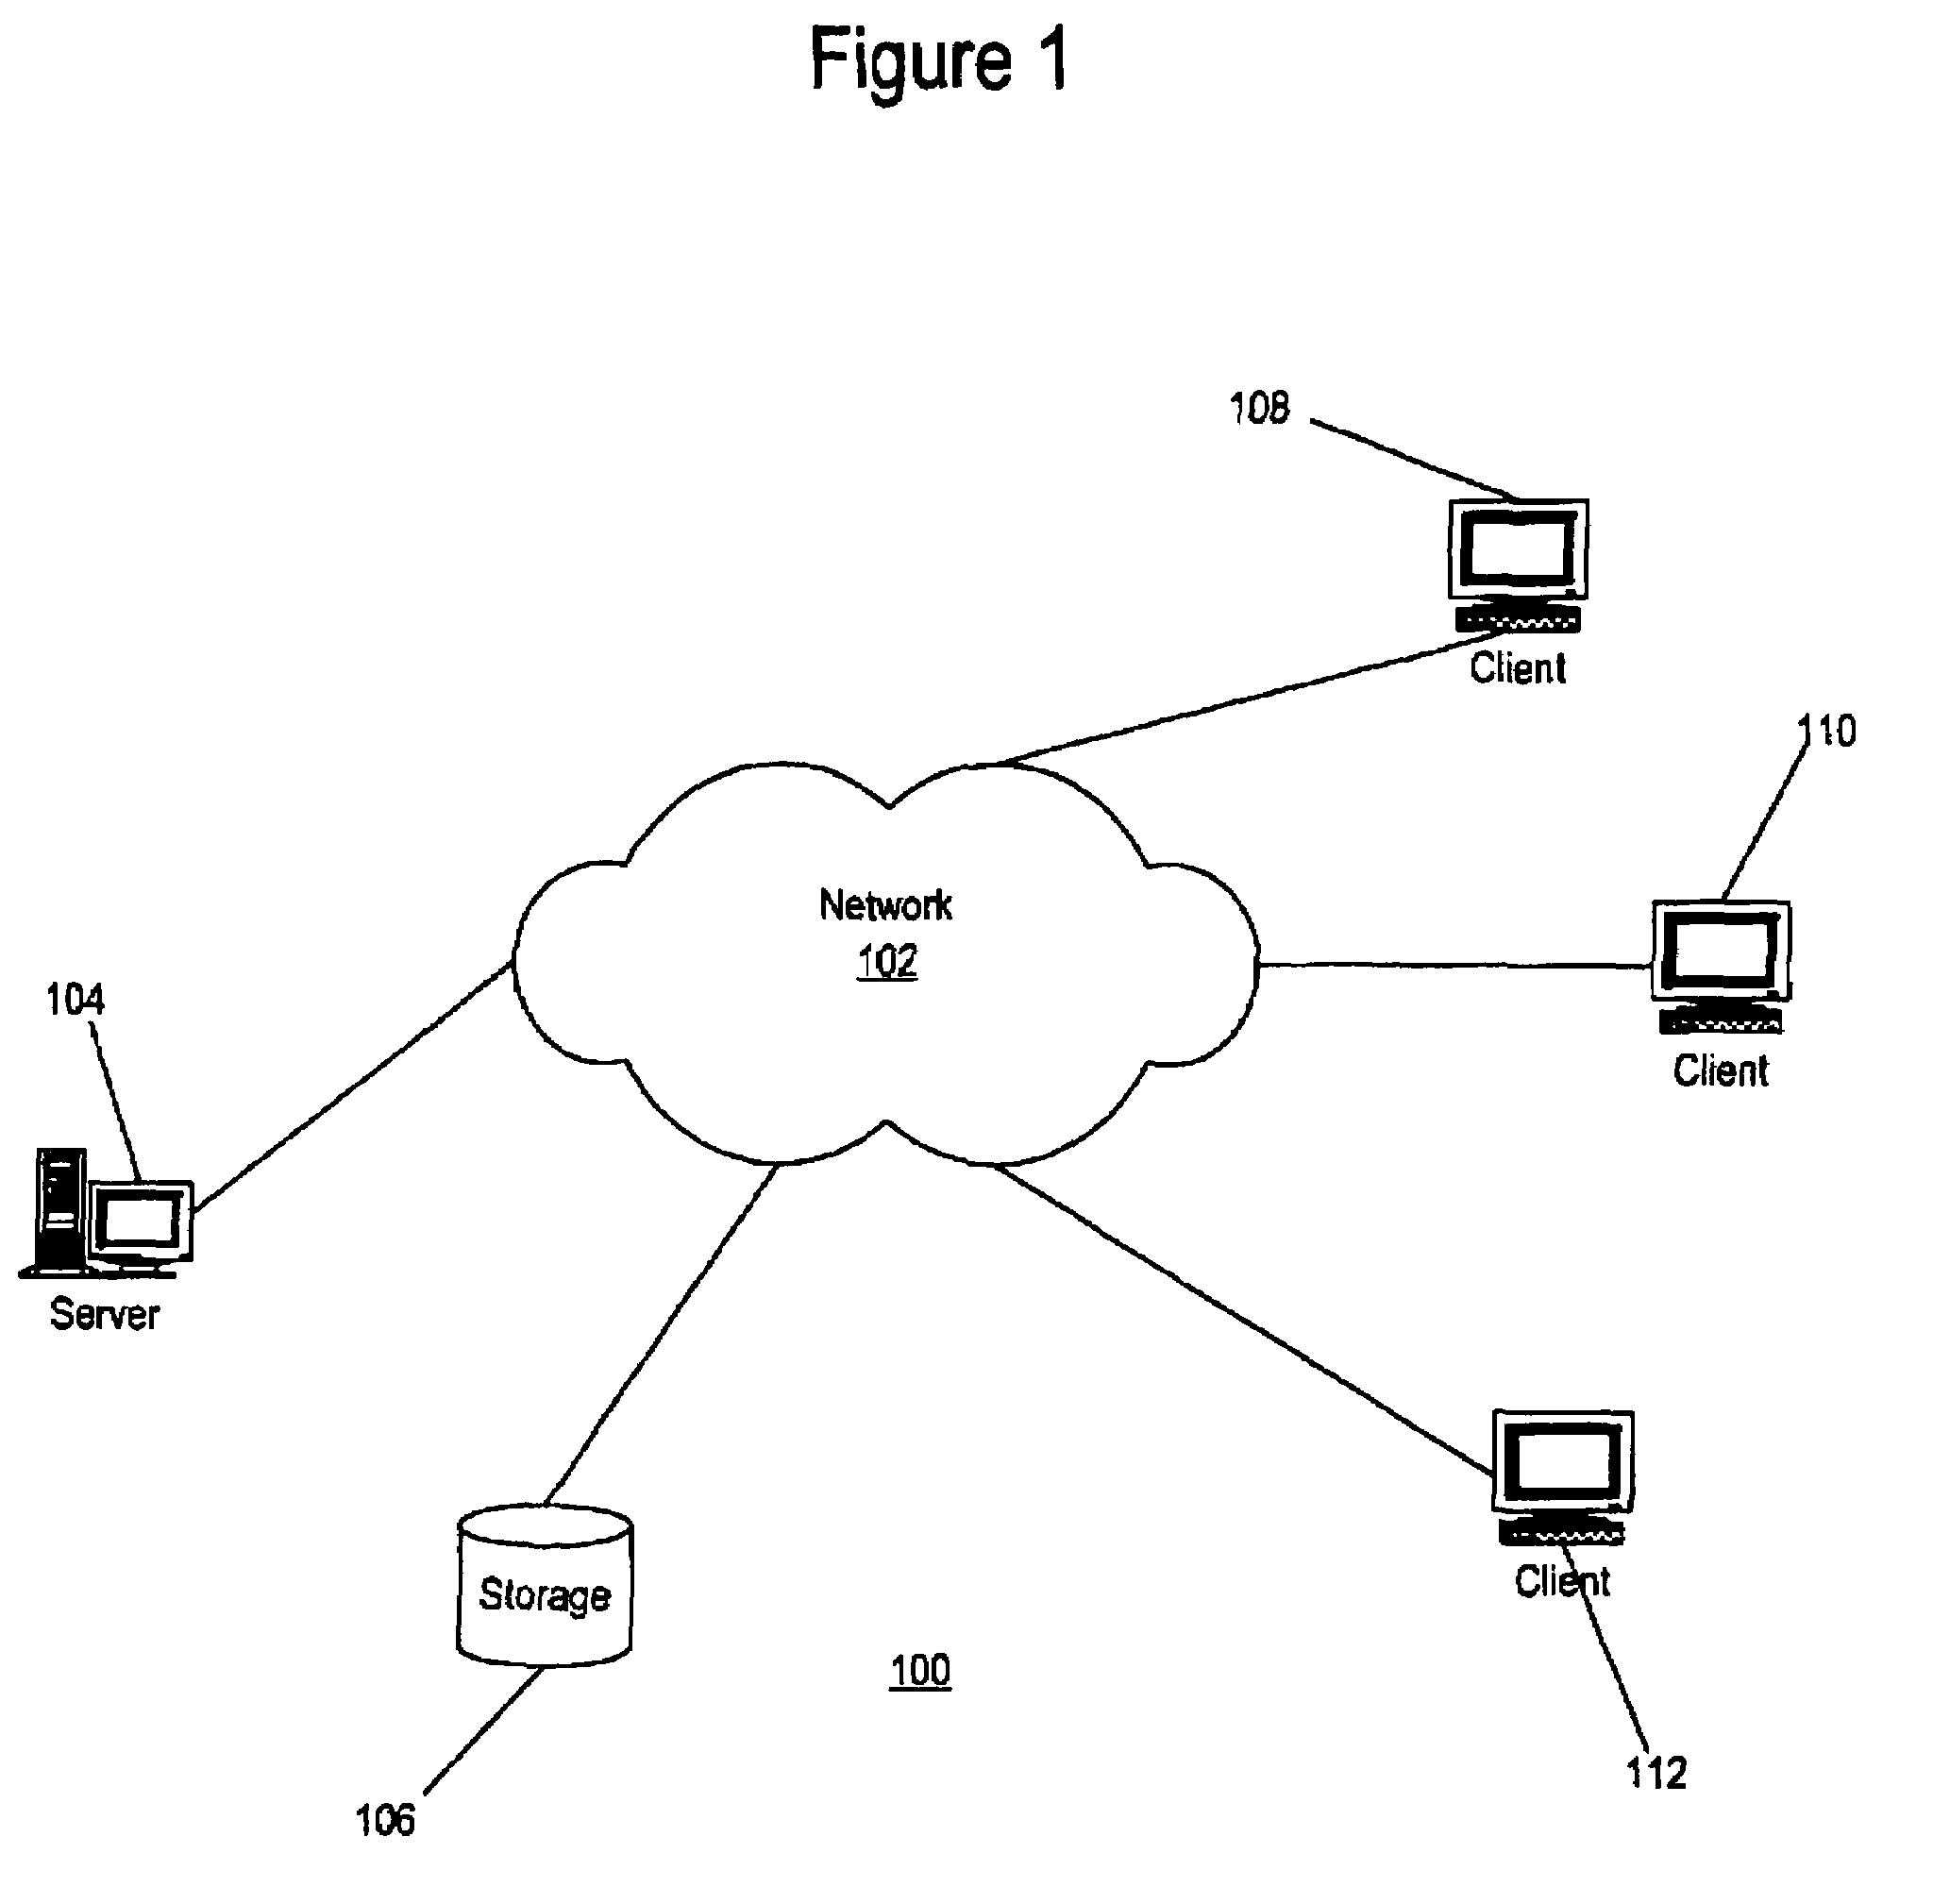 Method and system for tracing profiling information using per thread metric variables with reused kernel threads